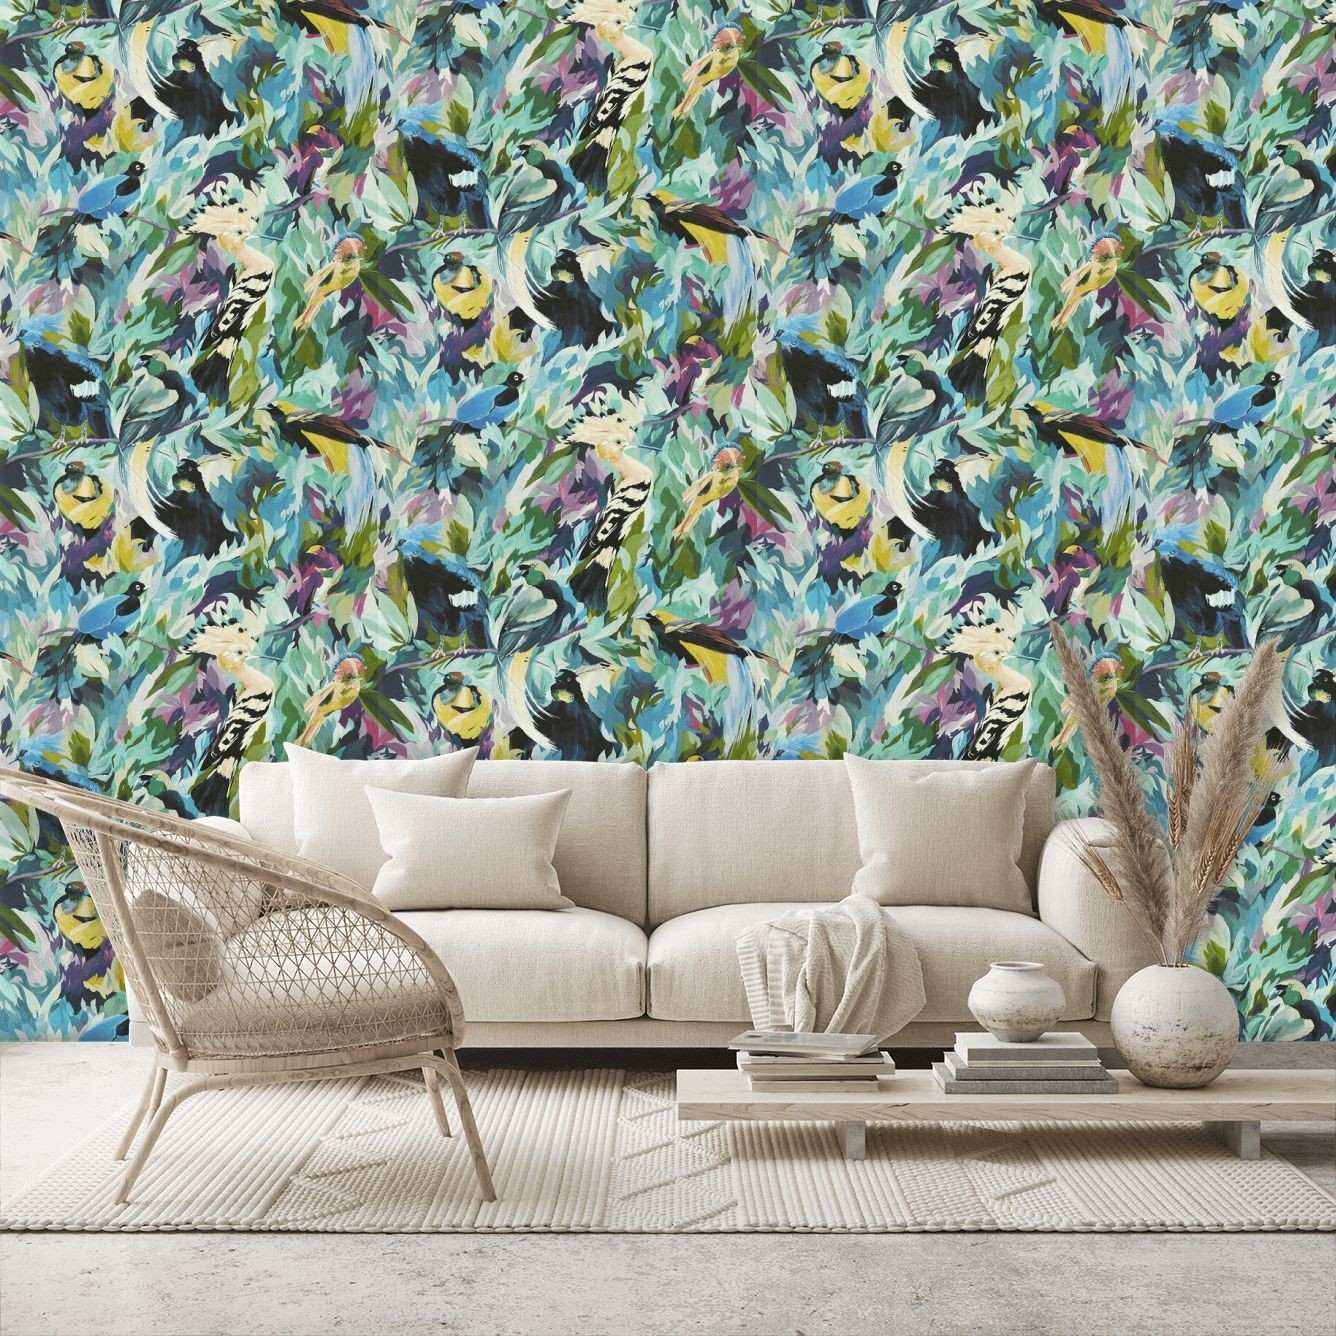 Dance of Adornment Wallpaper - Wilderness/ Nectar/ Pomegranate - By ...